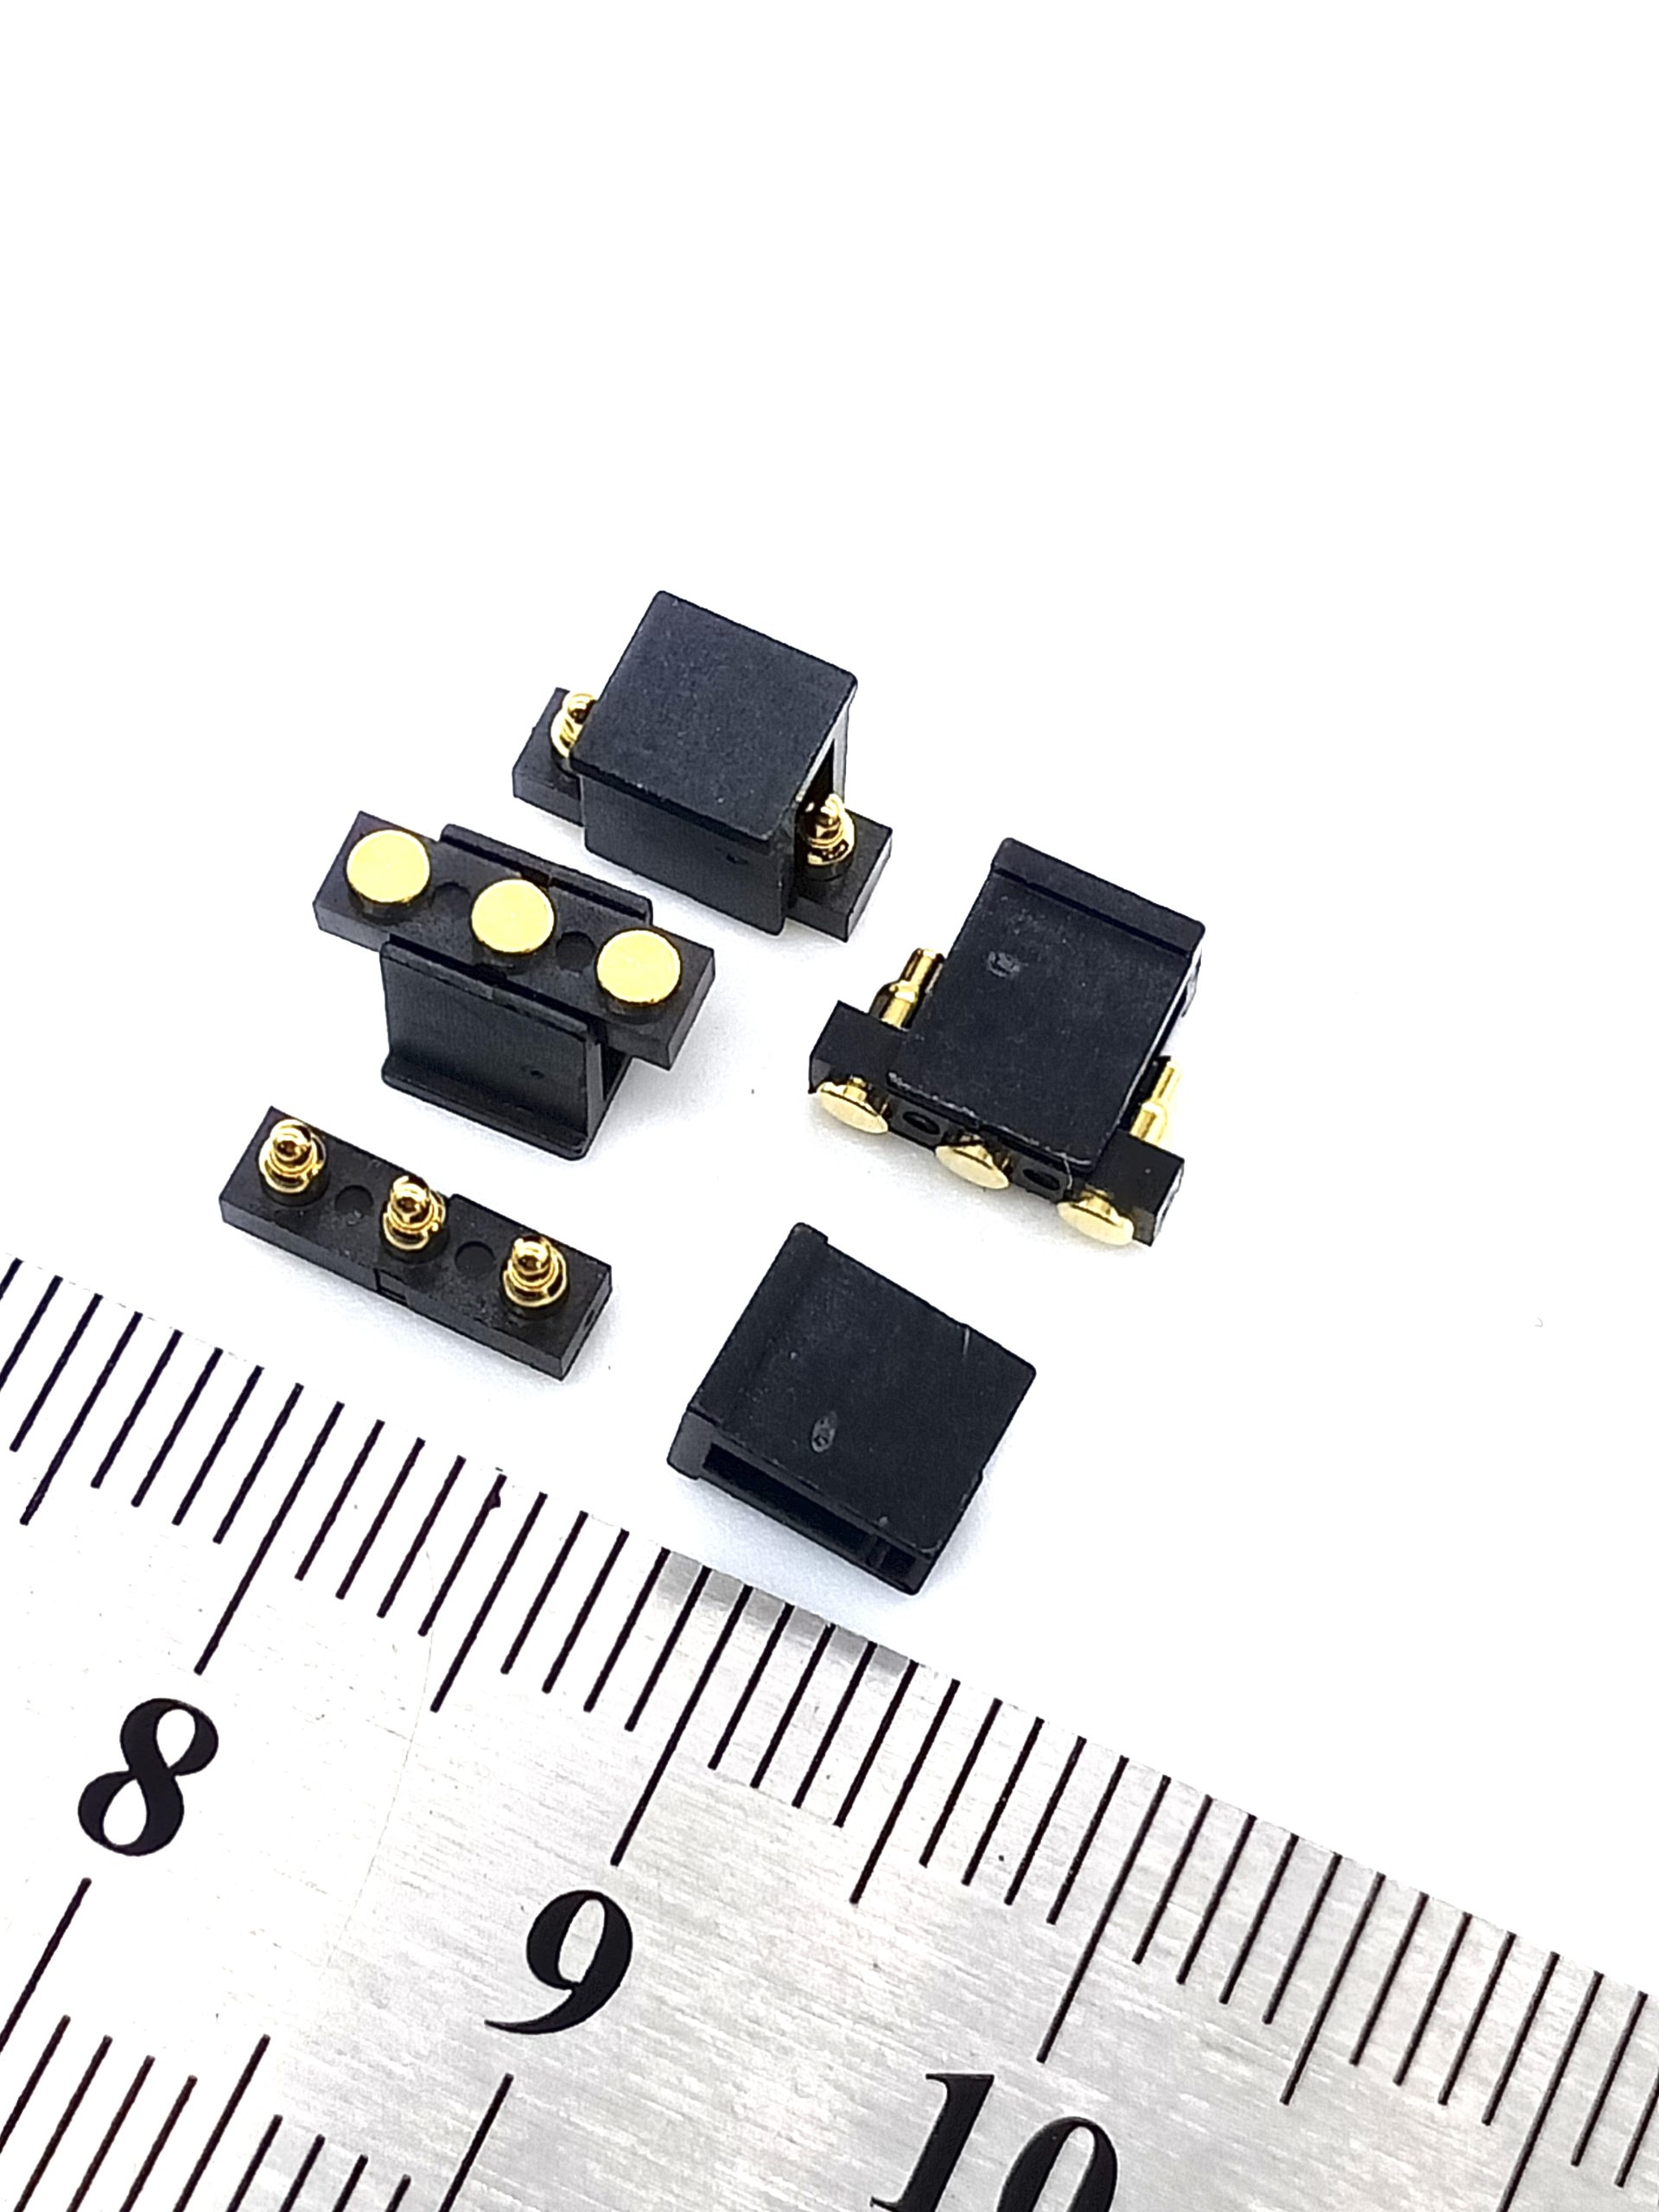 SMT pogo pin spring loaded connector 3mm pitch